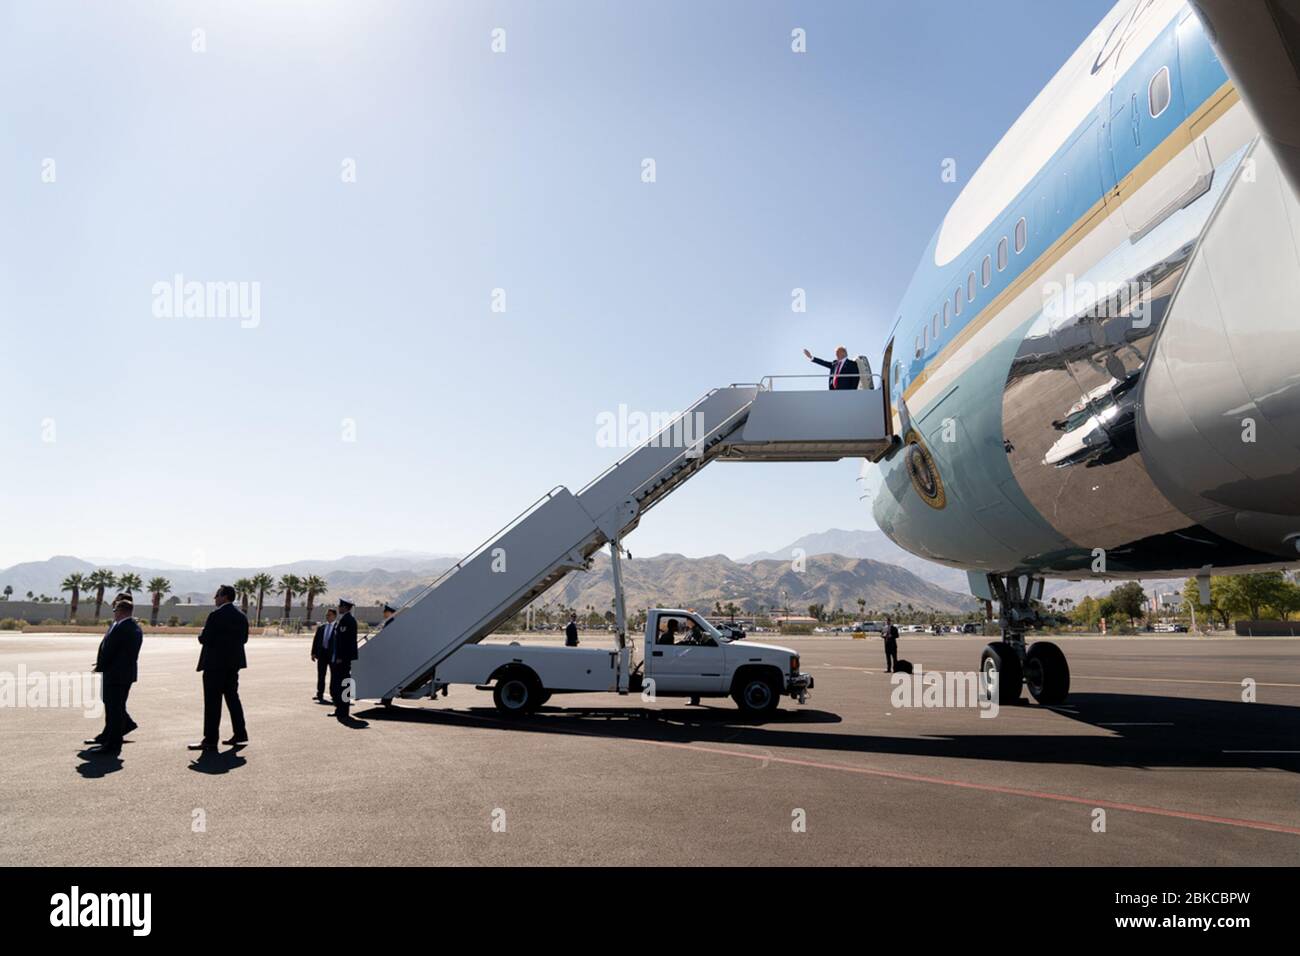 President Donald J. Trump waves as he disembarks Air Force One at Palm Spring International Airport in Palm Springs, Calif. Wednesday, Feb. 19, 2020, en route to an event at the Porcupine Creek Golf Course in Rancho Mirage, Calif. President Trump in CA Stock Photo